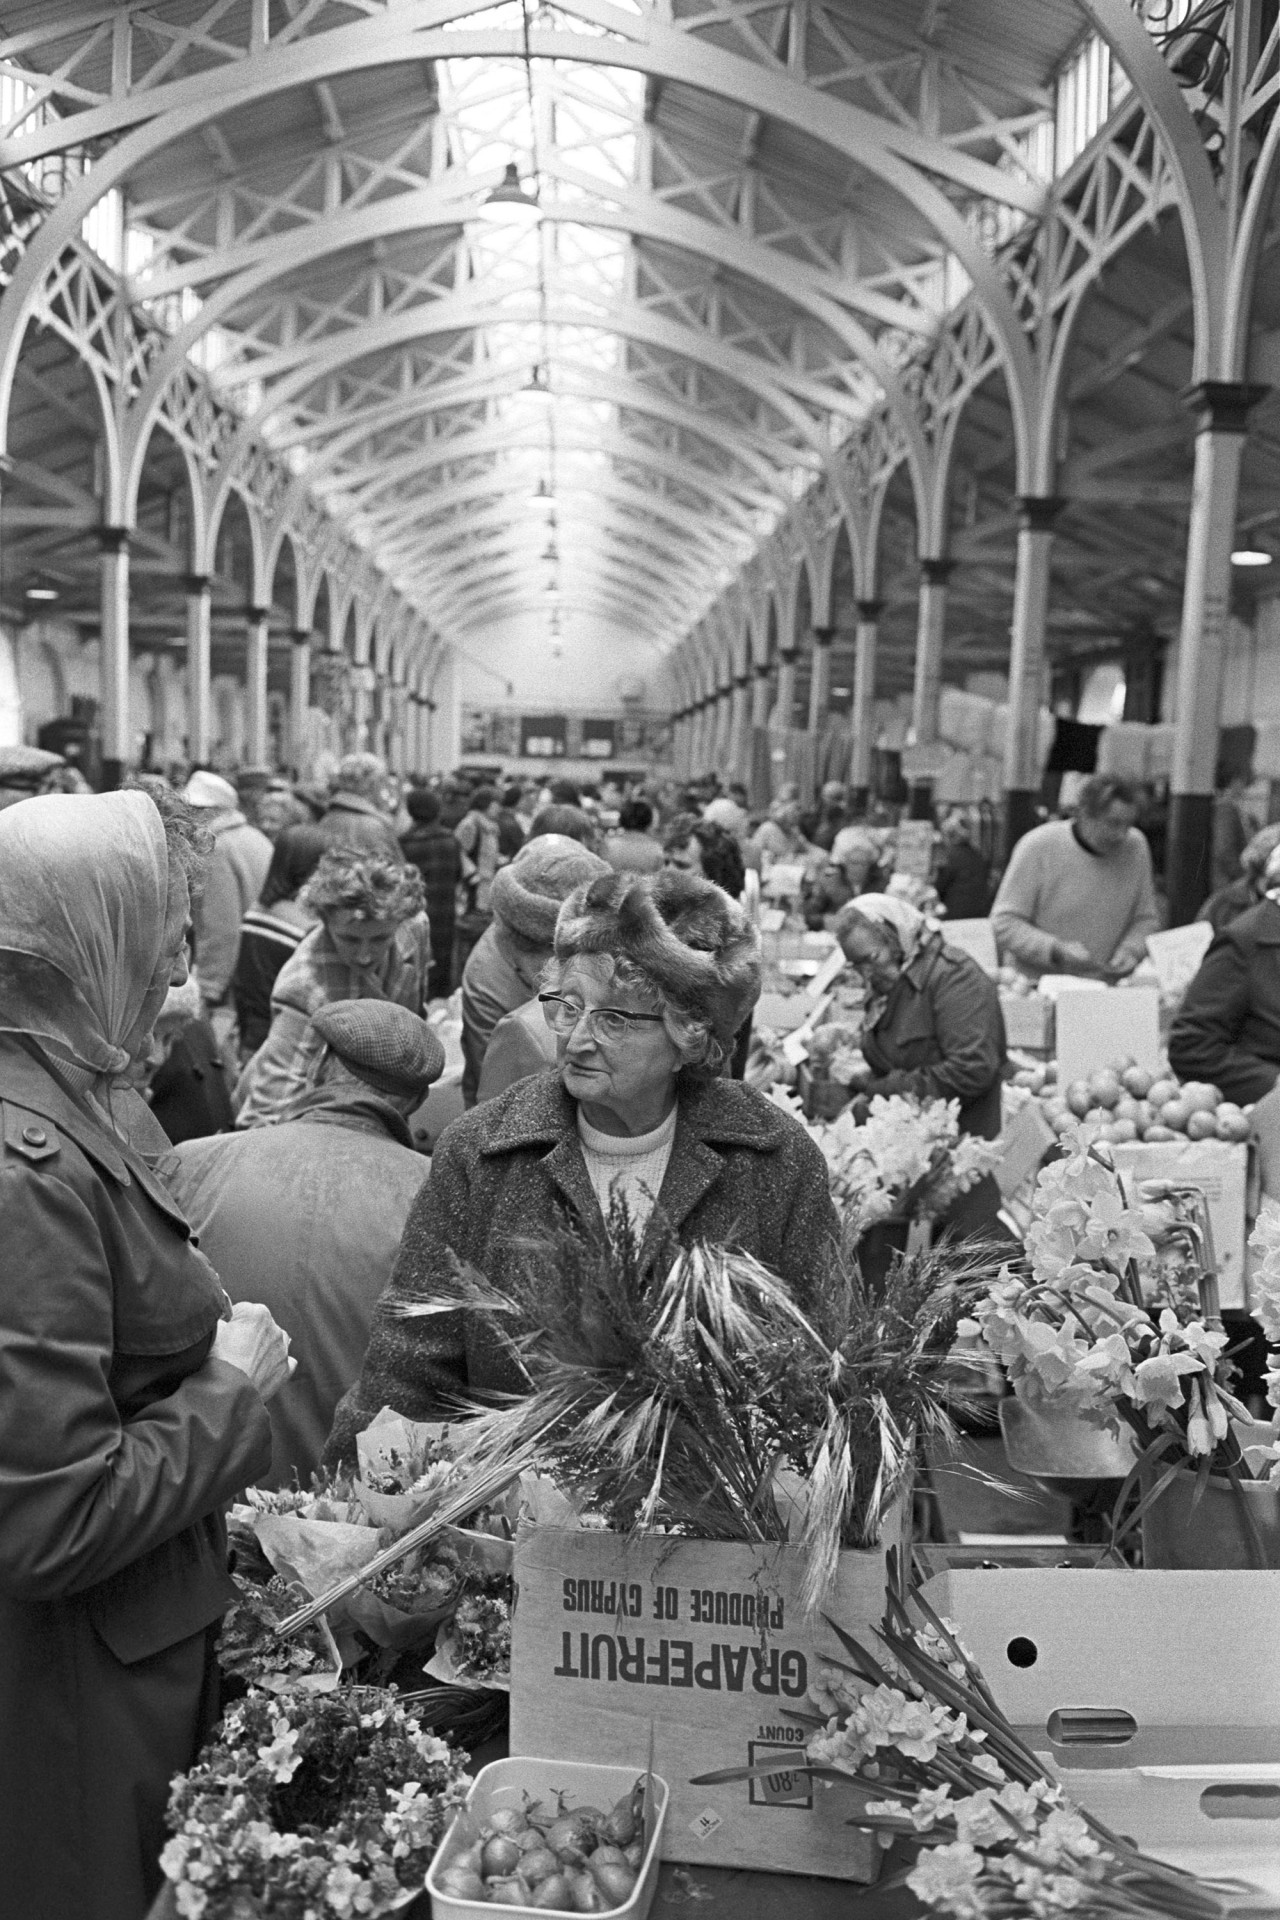 Pannier market, woman vegetable and flower stall. 
[Two women talking at a stall with flowers and onions at Barnstaple Pannier Market. Other market traders and shoppers are visible in the background.]